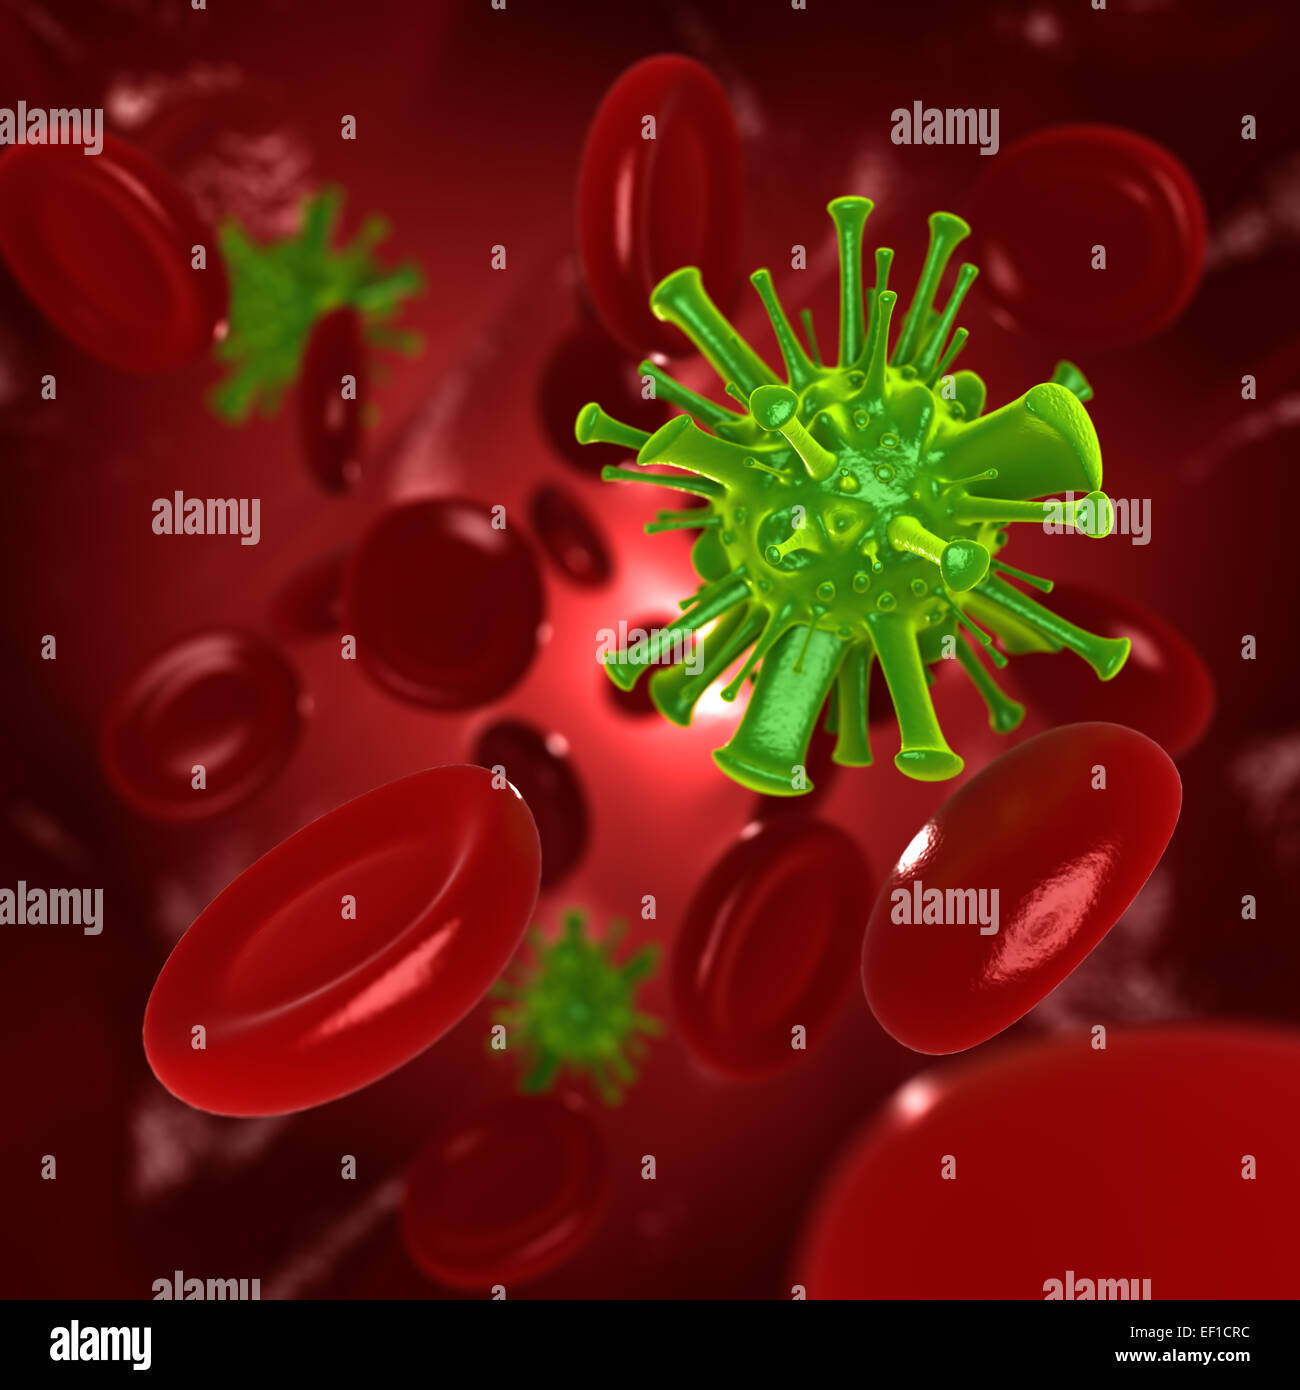 Virus in red blood cells Stock Photo